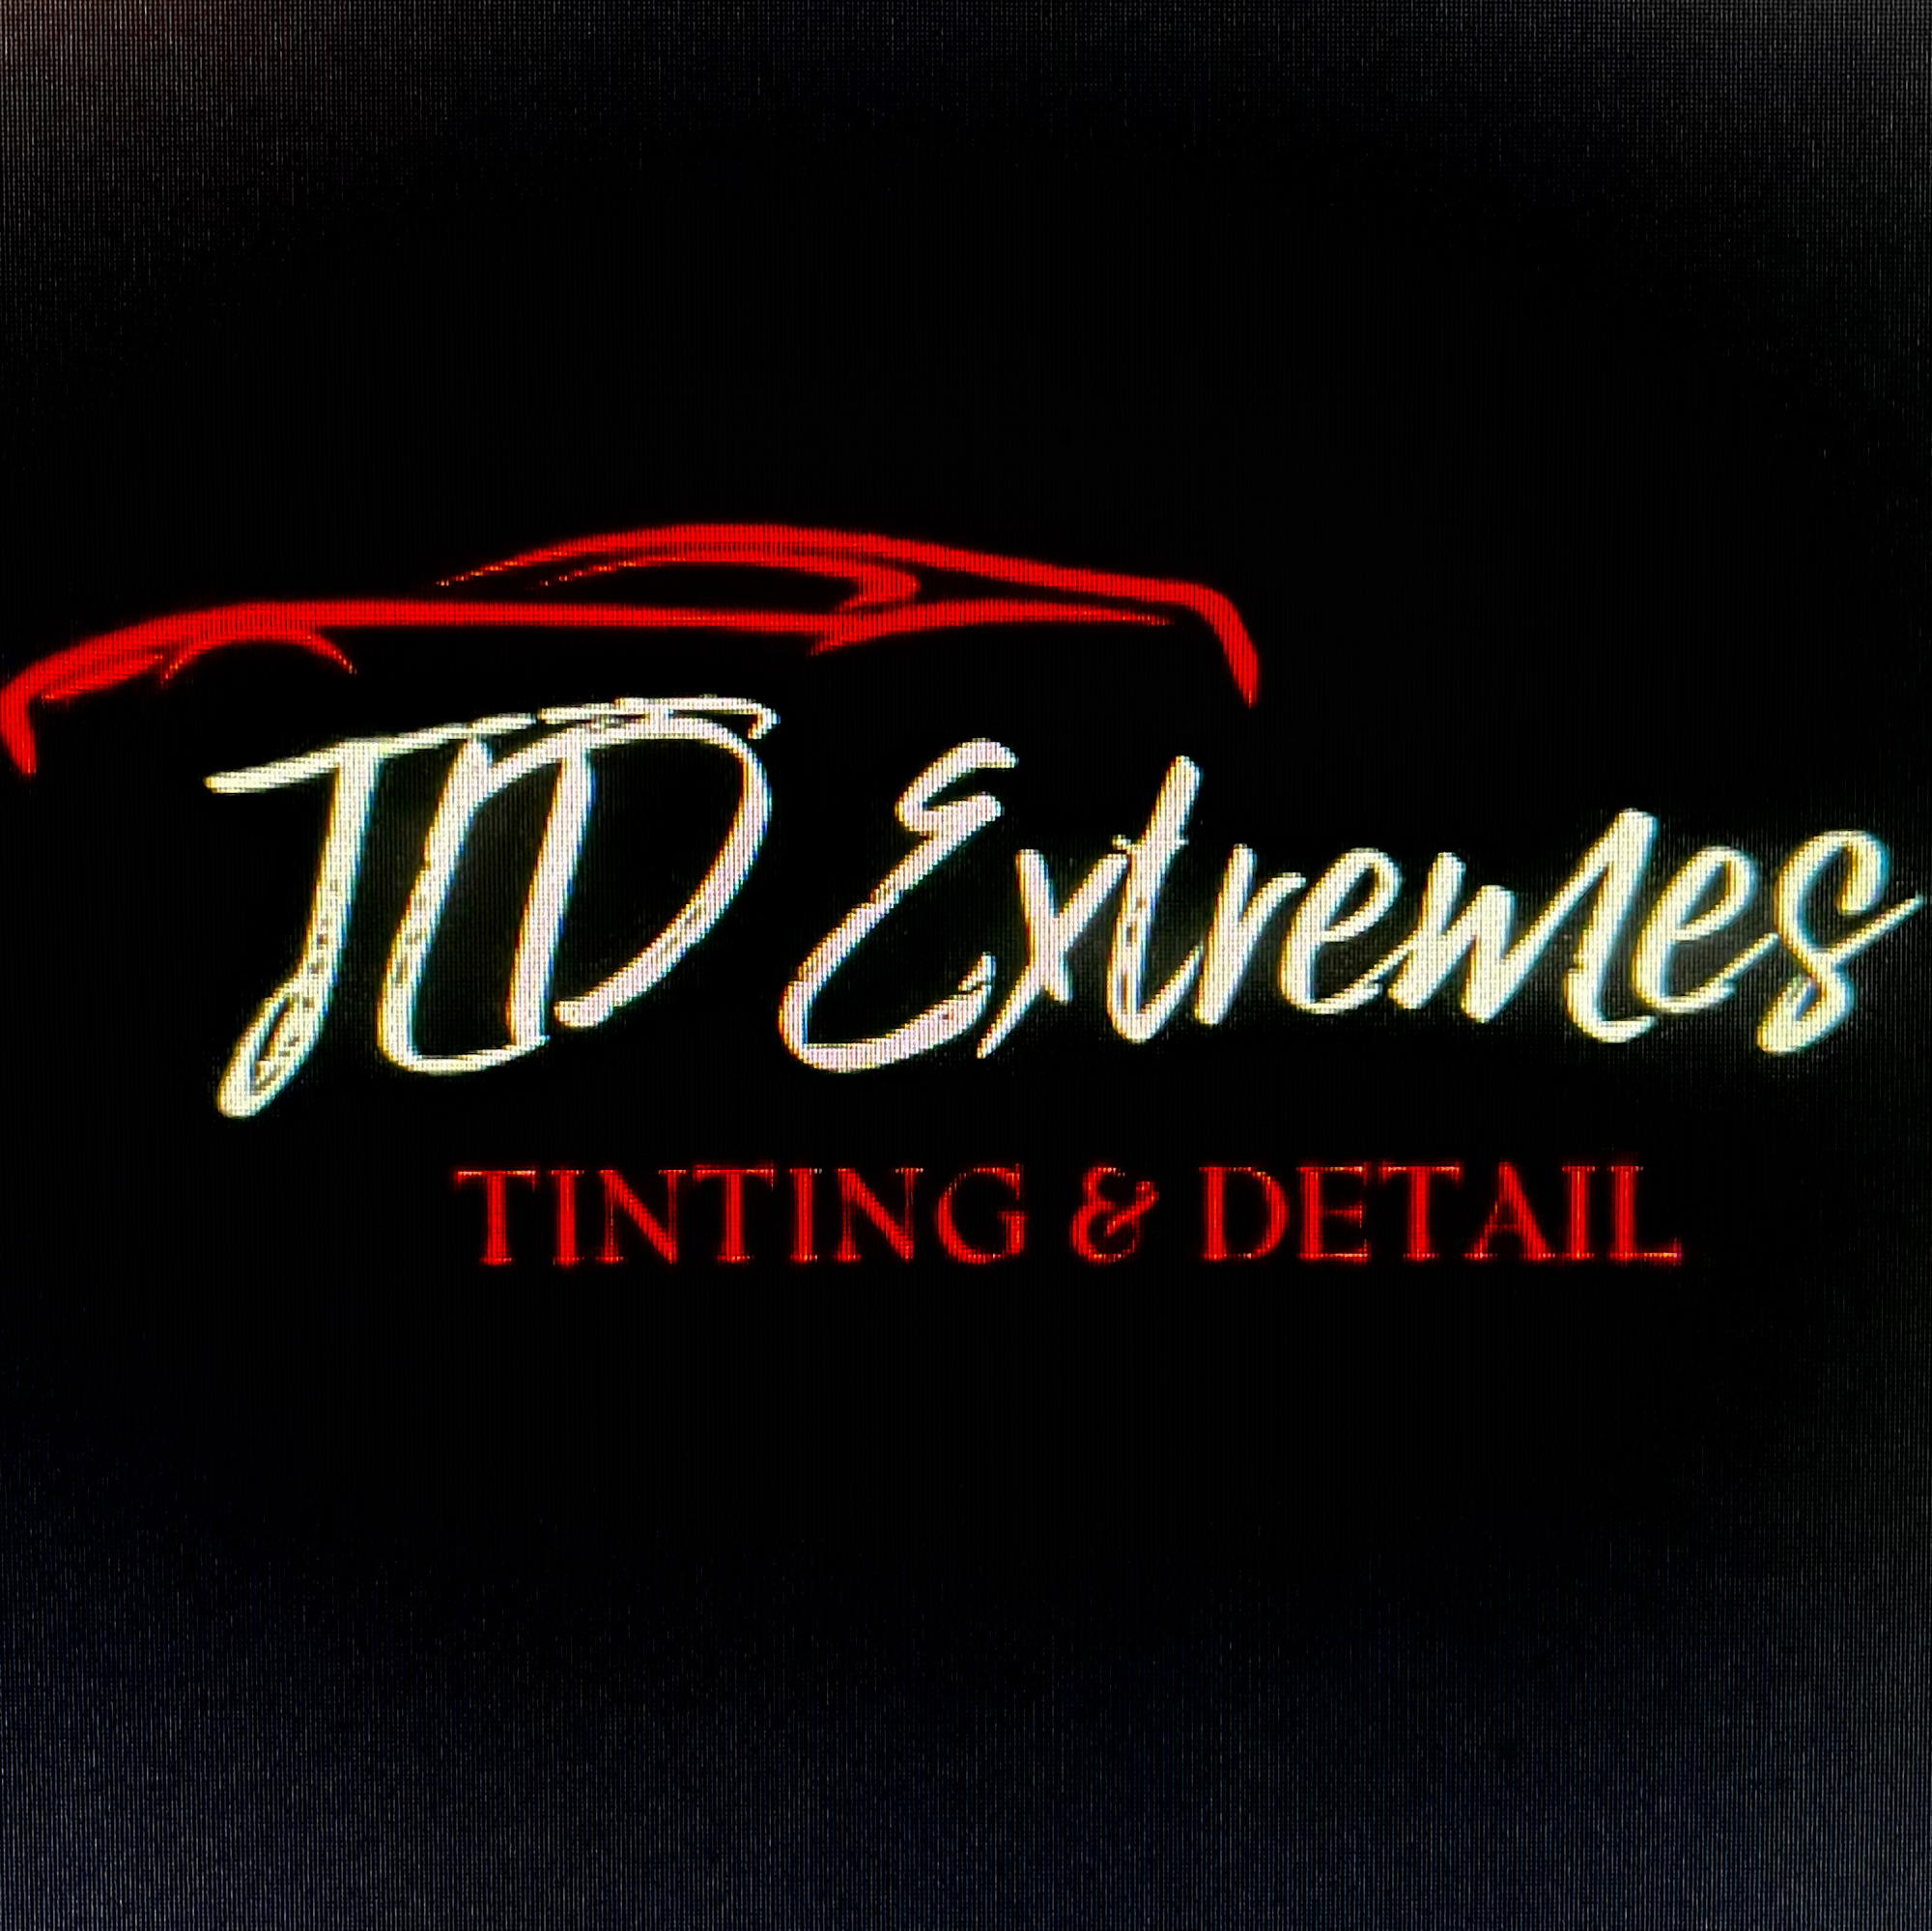 JLD Extremes Tinting & Detail 3169 US-33 W, Weston West Virginia 26452